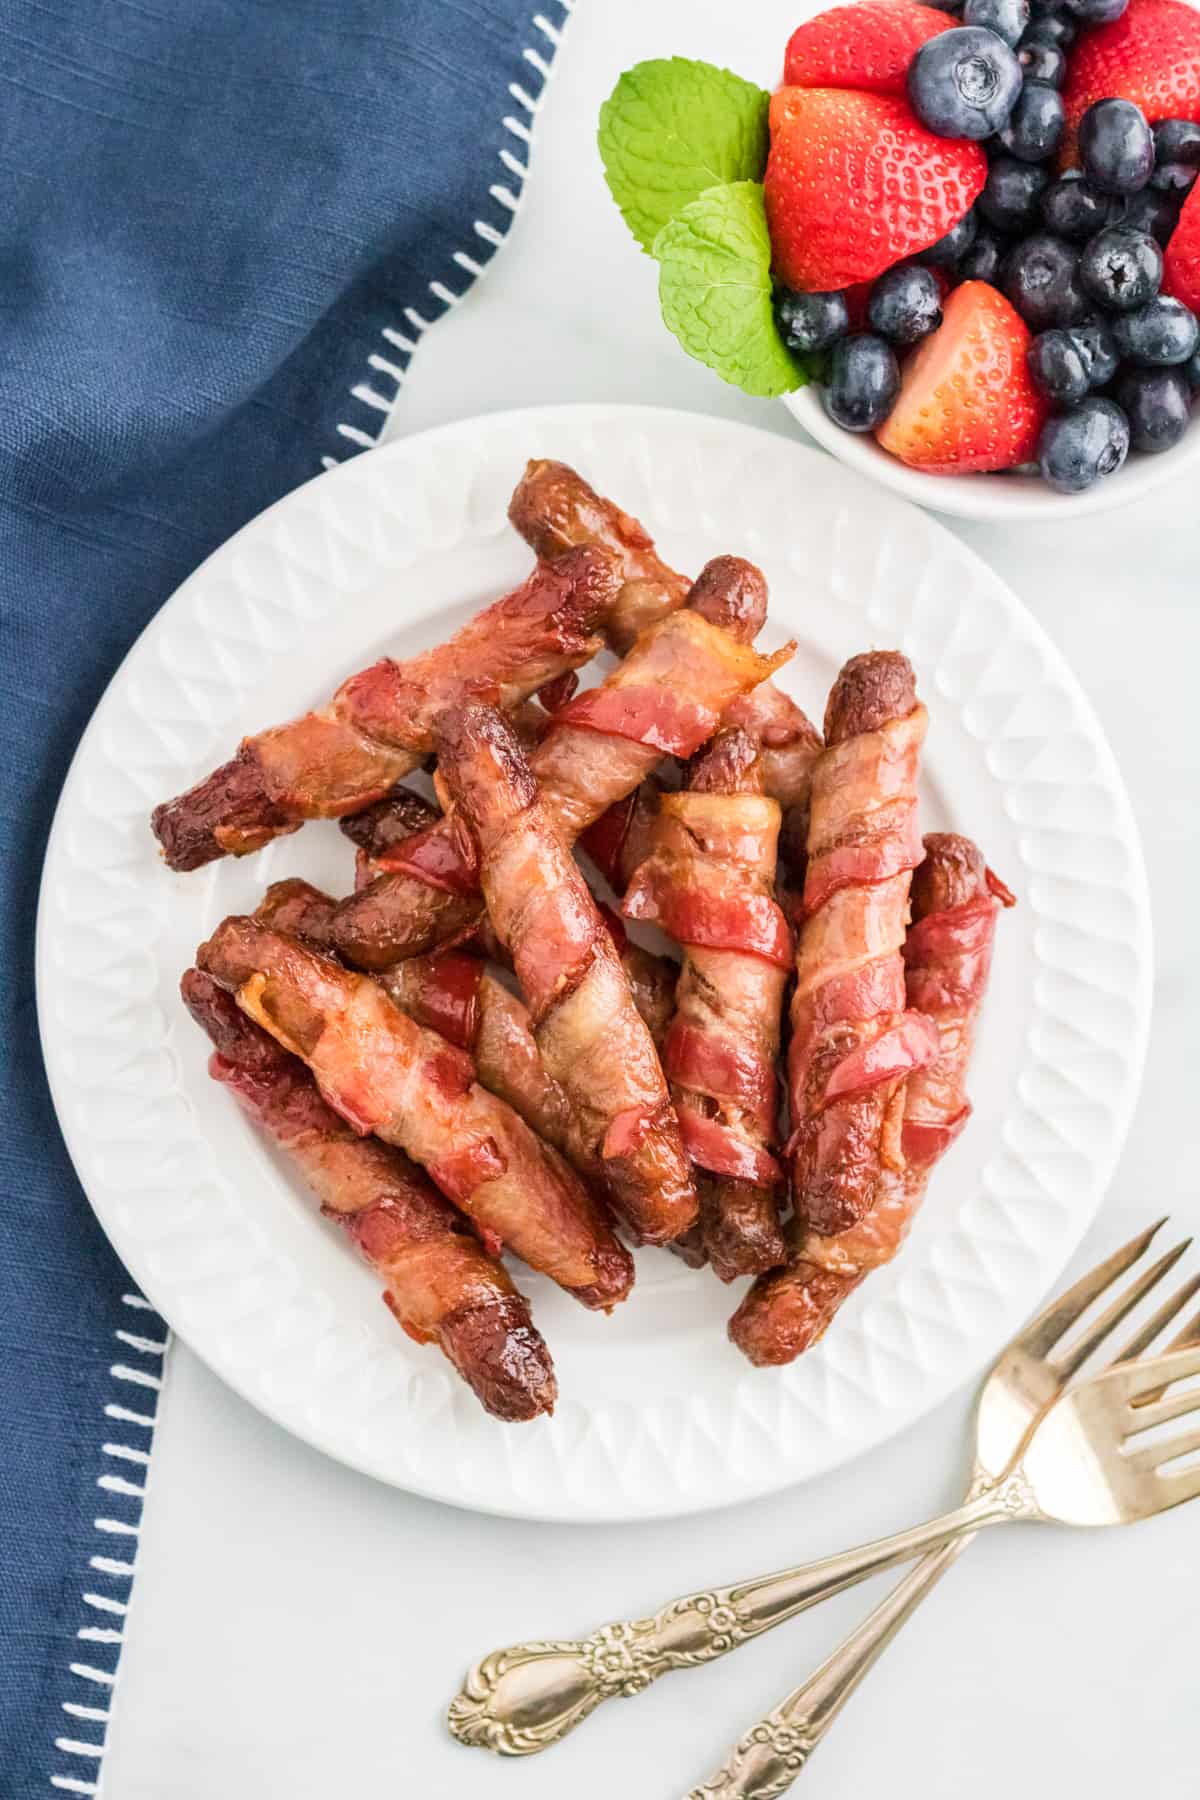 Overhead of stacked Bacon Wrapped Sausages on white plate with a bowl of fruit and forks beside it.